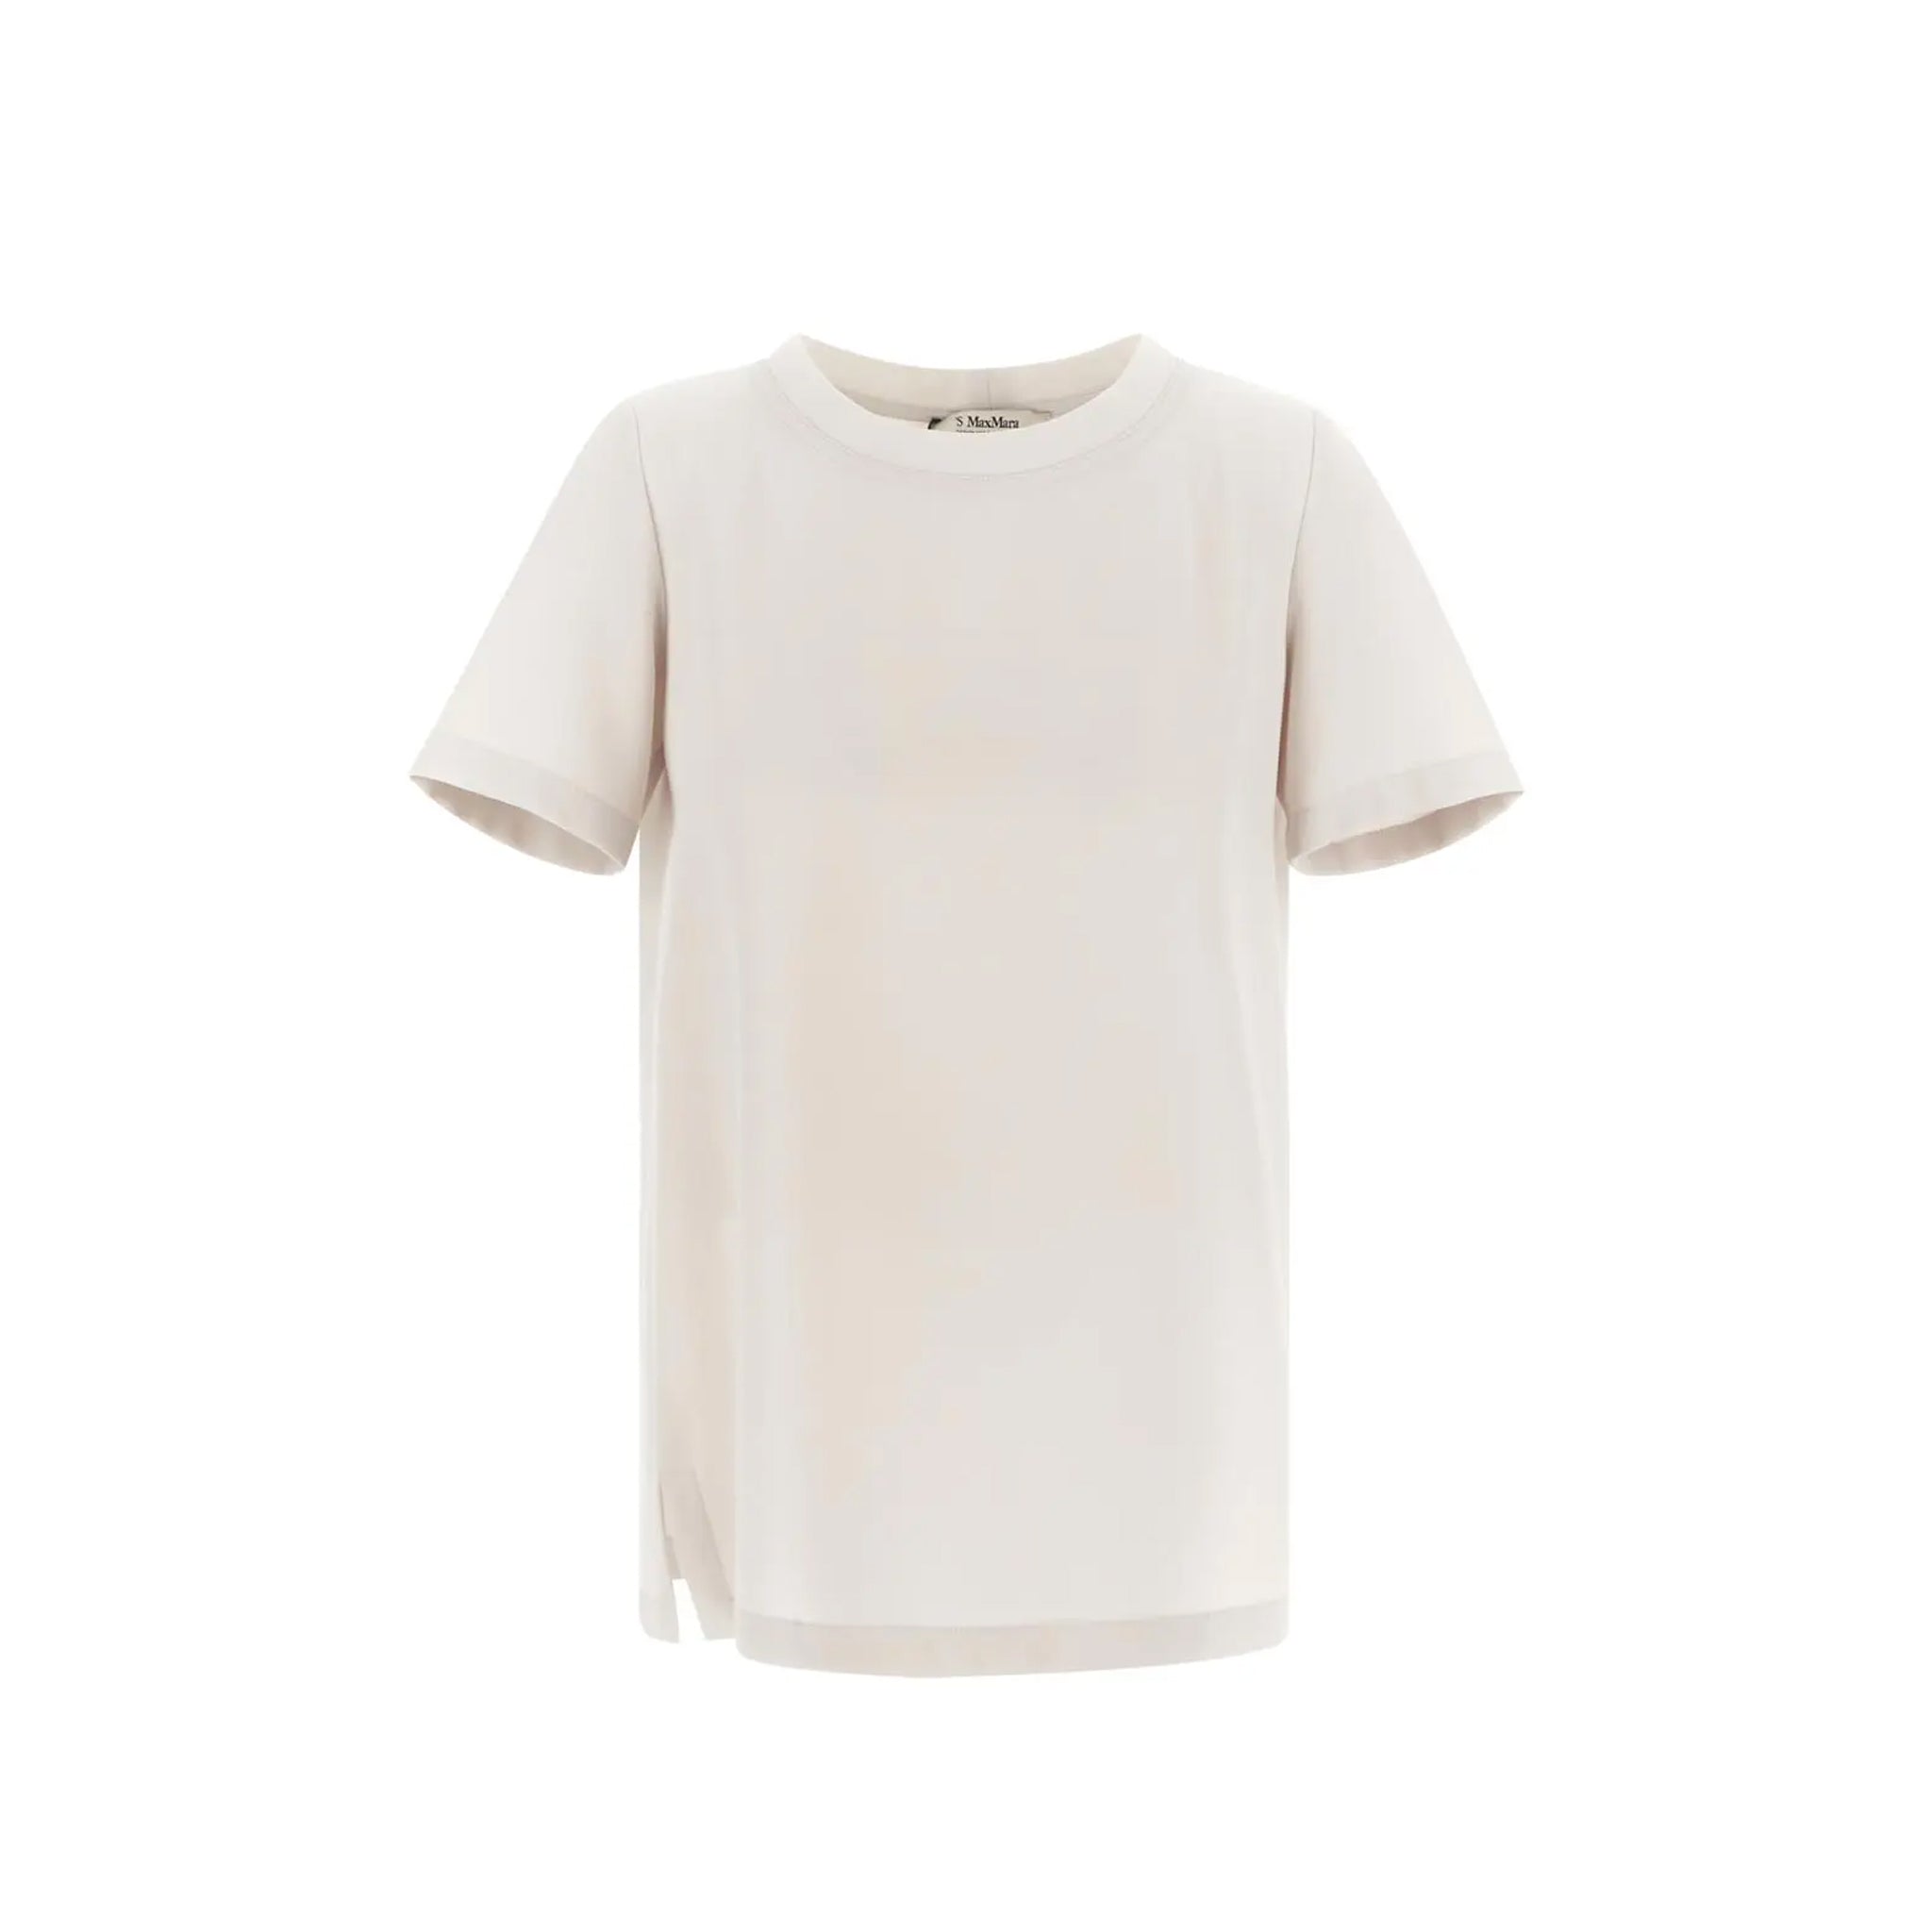 S-MAX-MARA-OUTLET-SALE-s-Max-Mara-Umes-T-Shirt-Shirts-ARCHIVE-COLLECTION.jpg